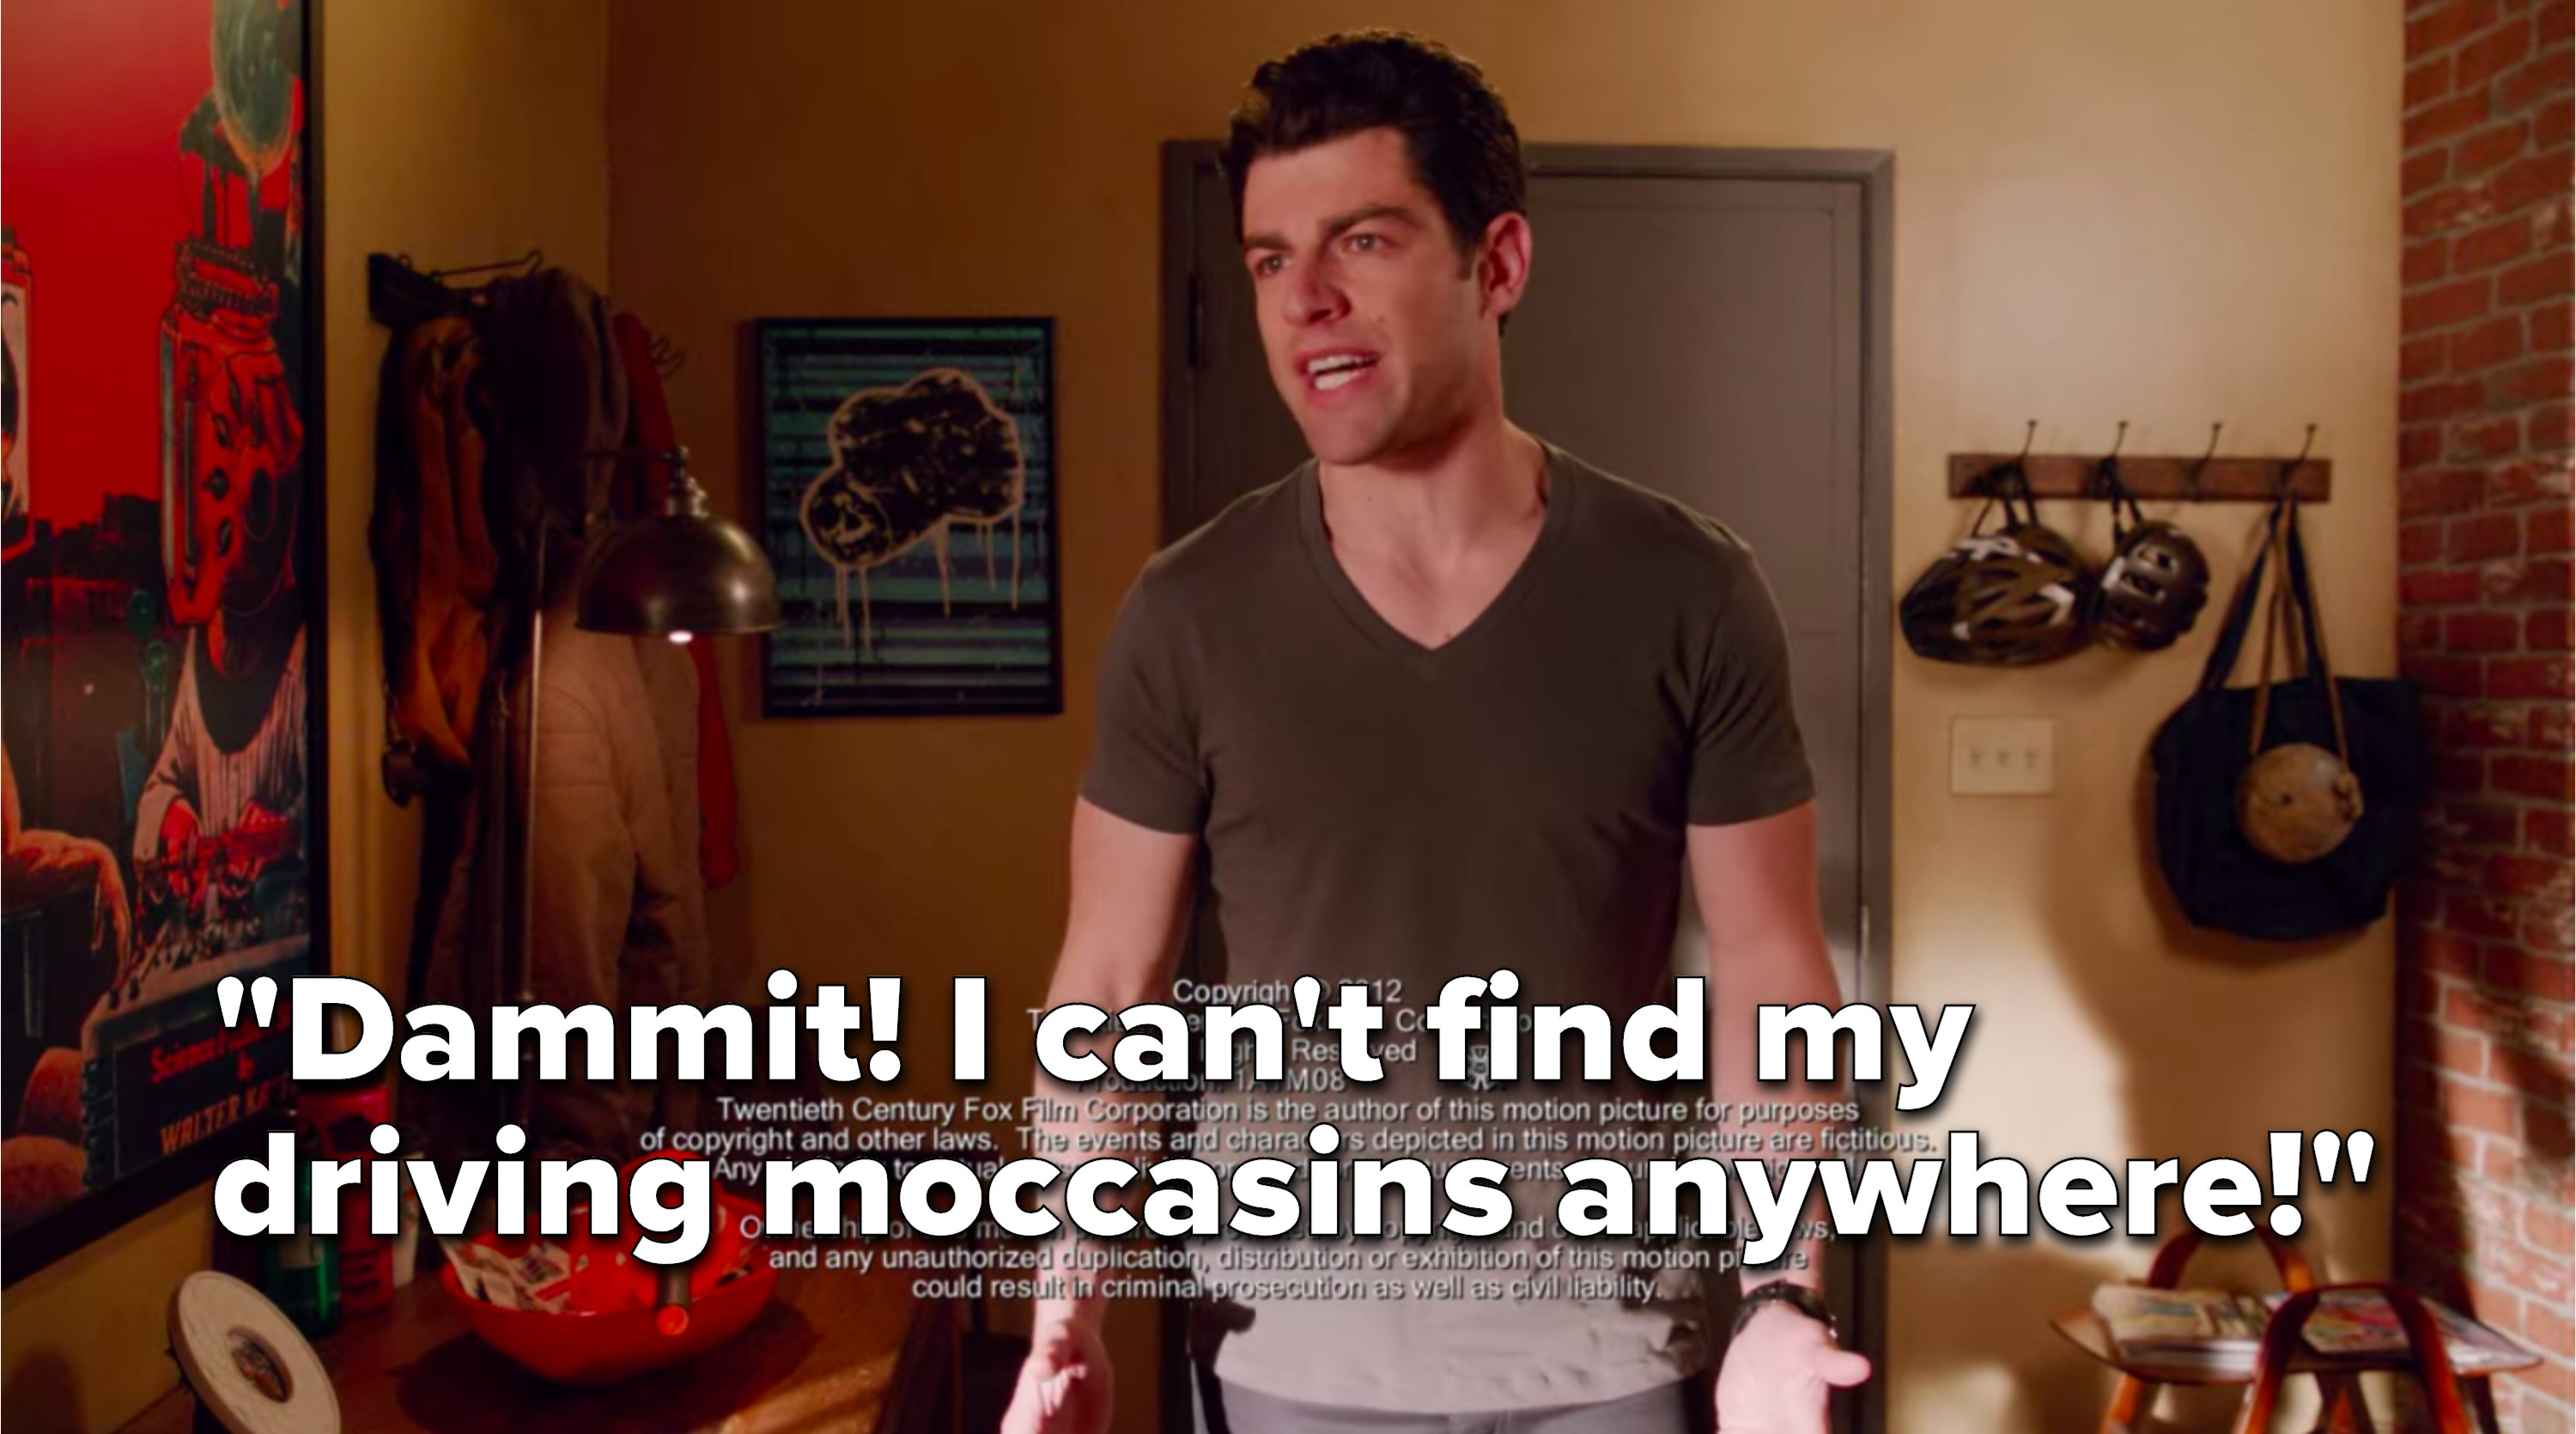 Schmidt says, Dammit, I cant find my driving moccasins anywhere